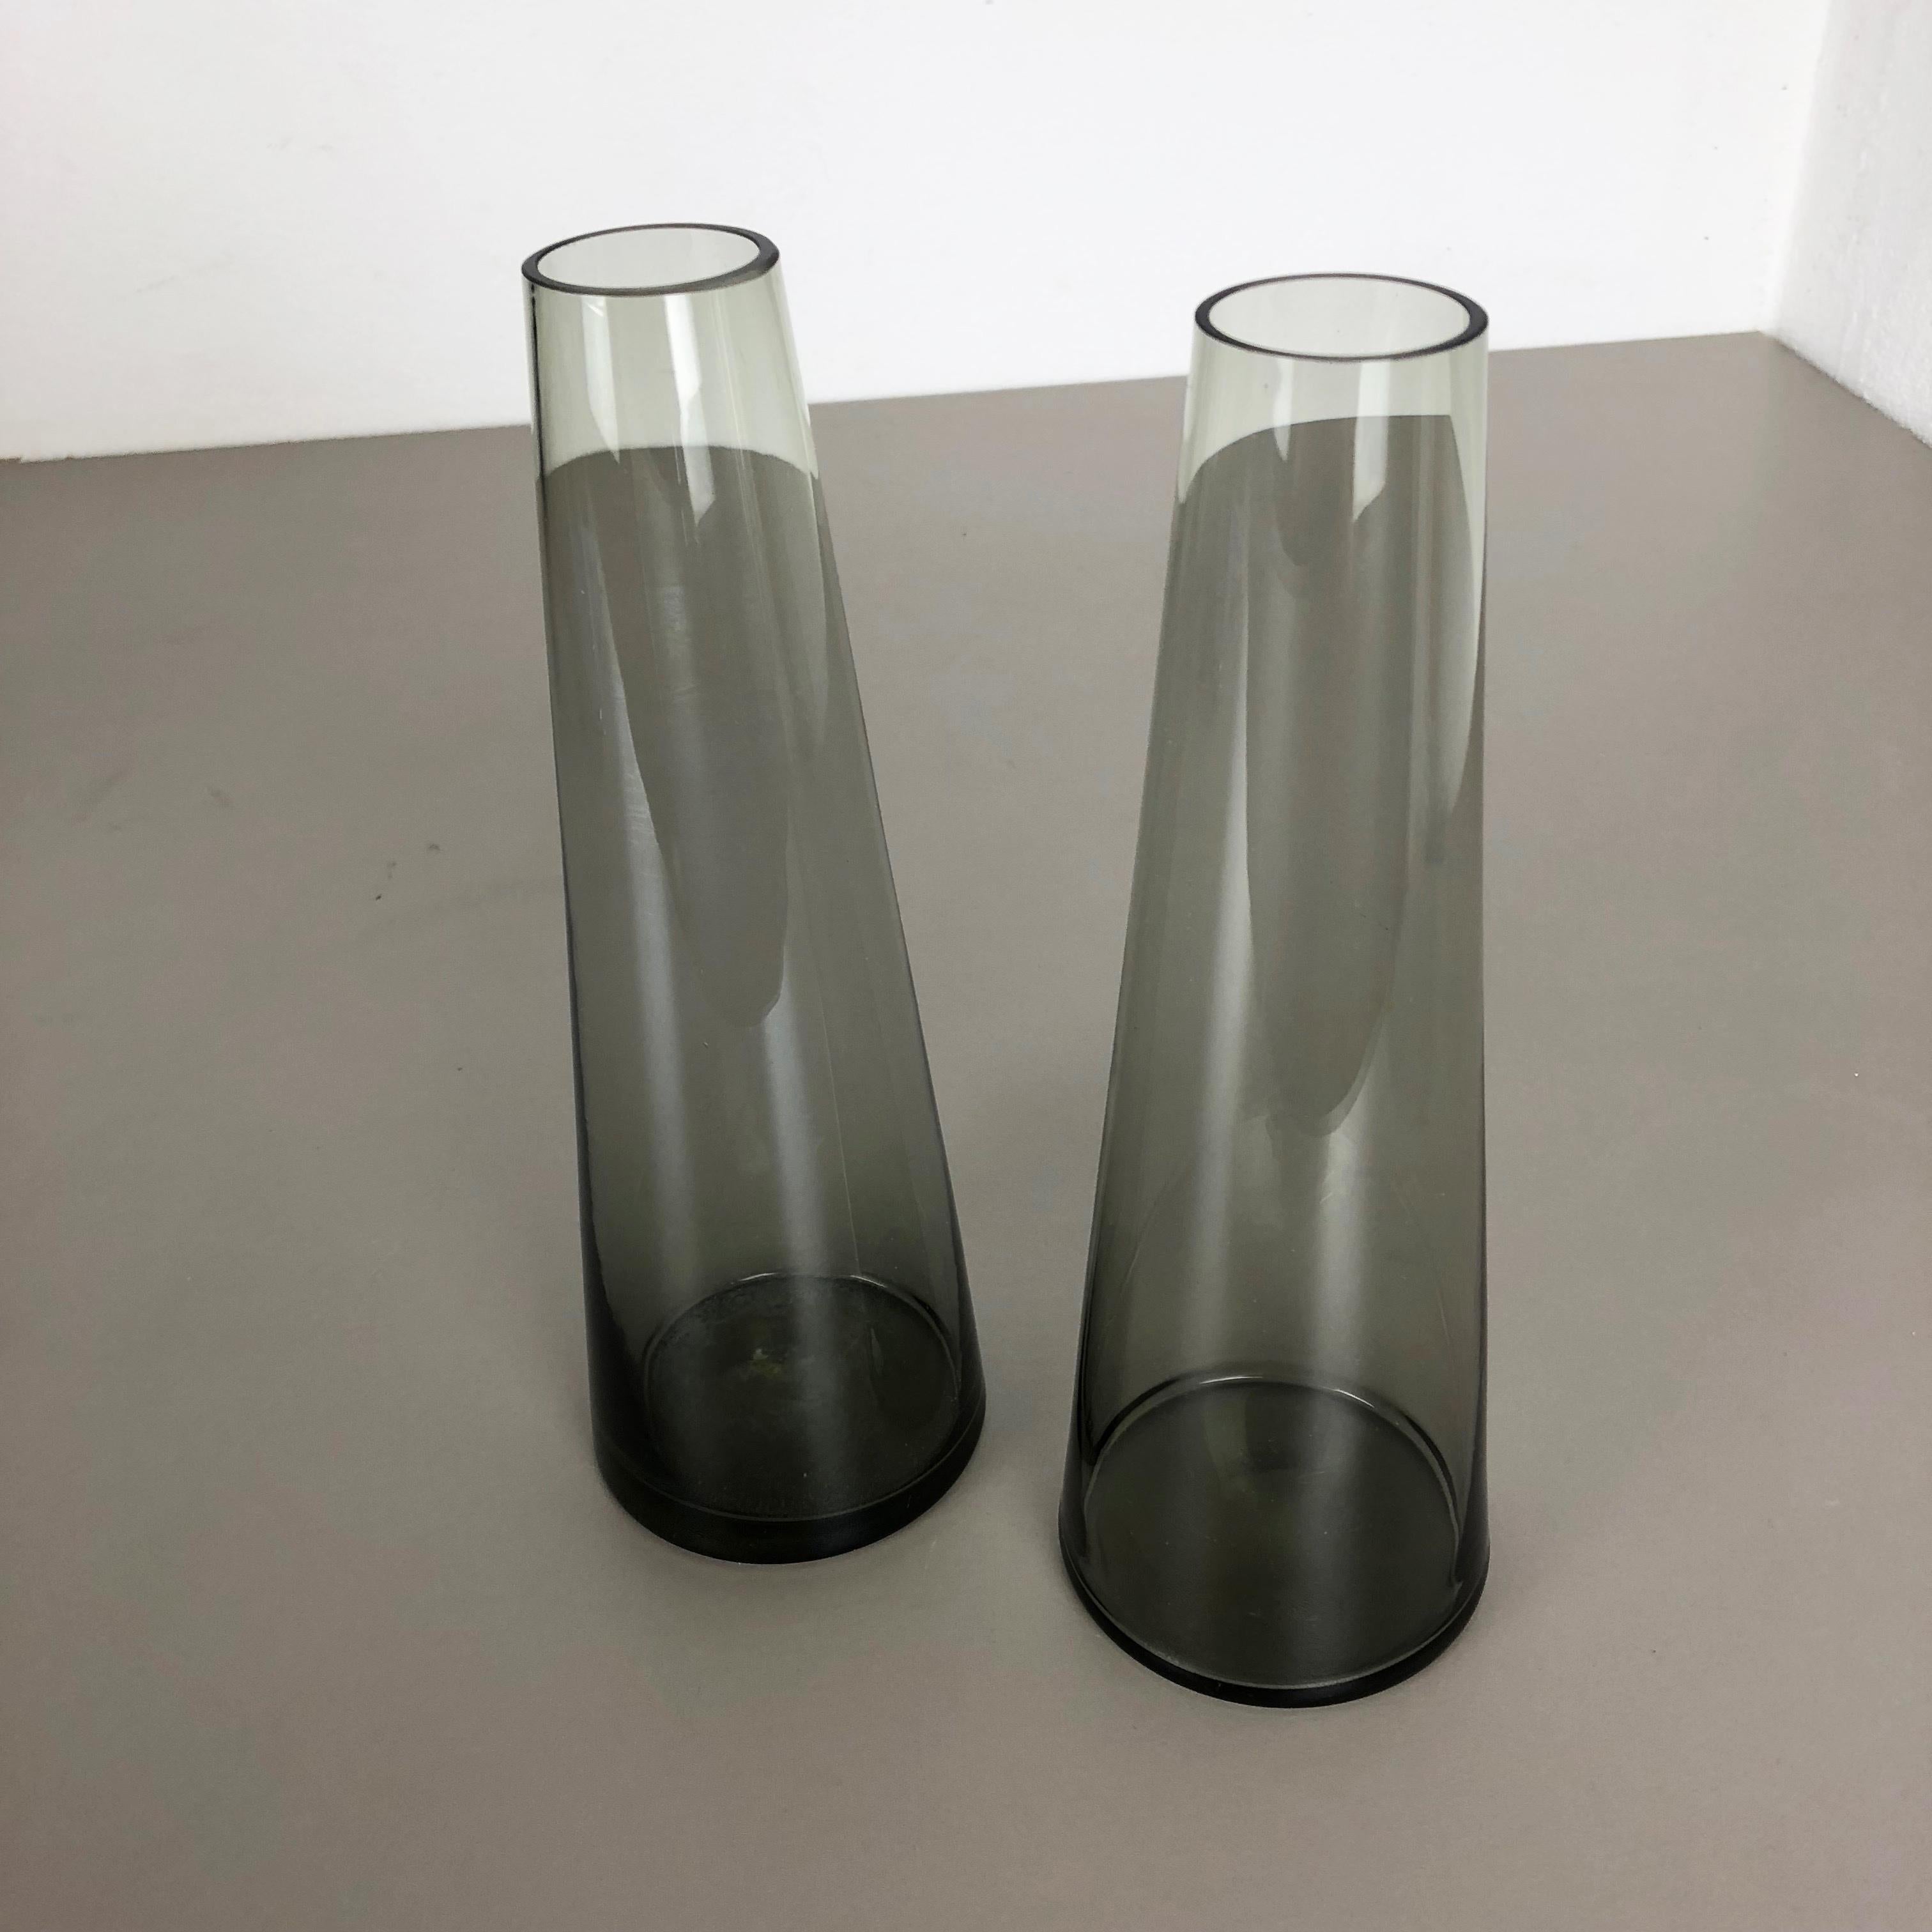 Vintage 1960s Set of 2 Turmalin Vases by Wilhelm Wagenfeld for WMF, Germany For Sale 3